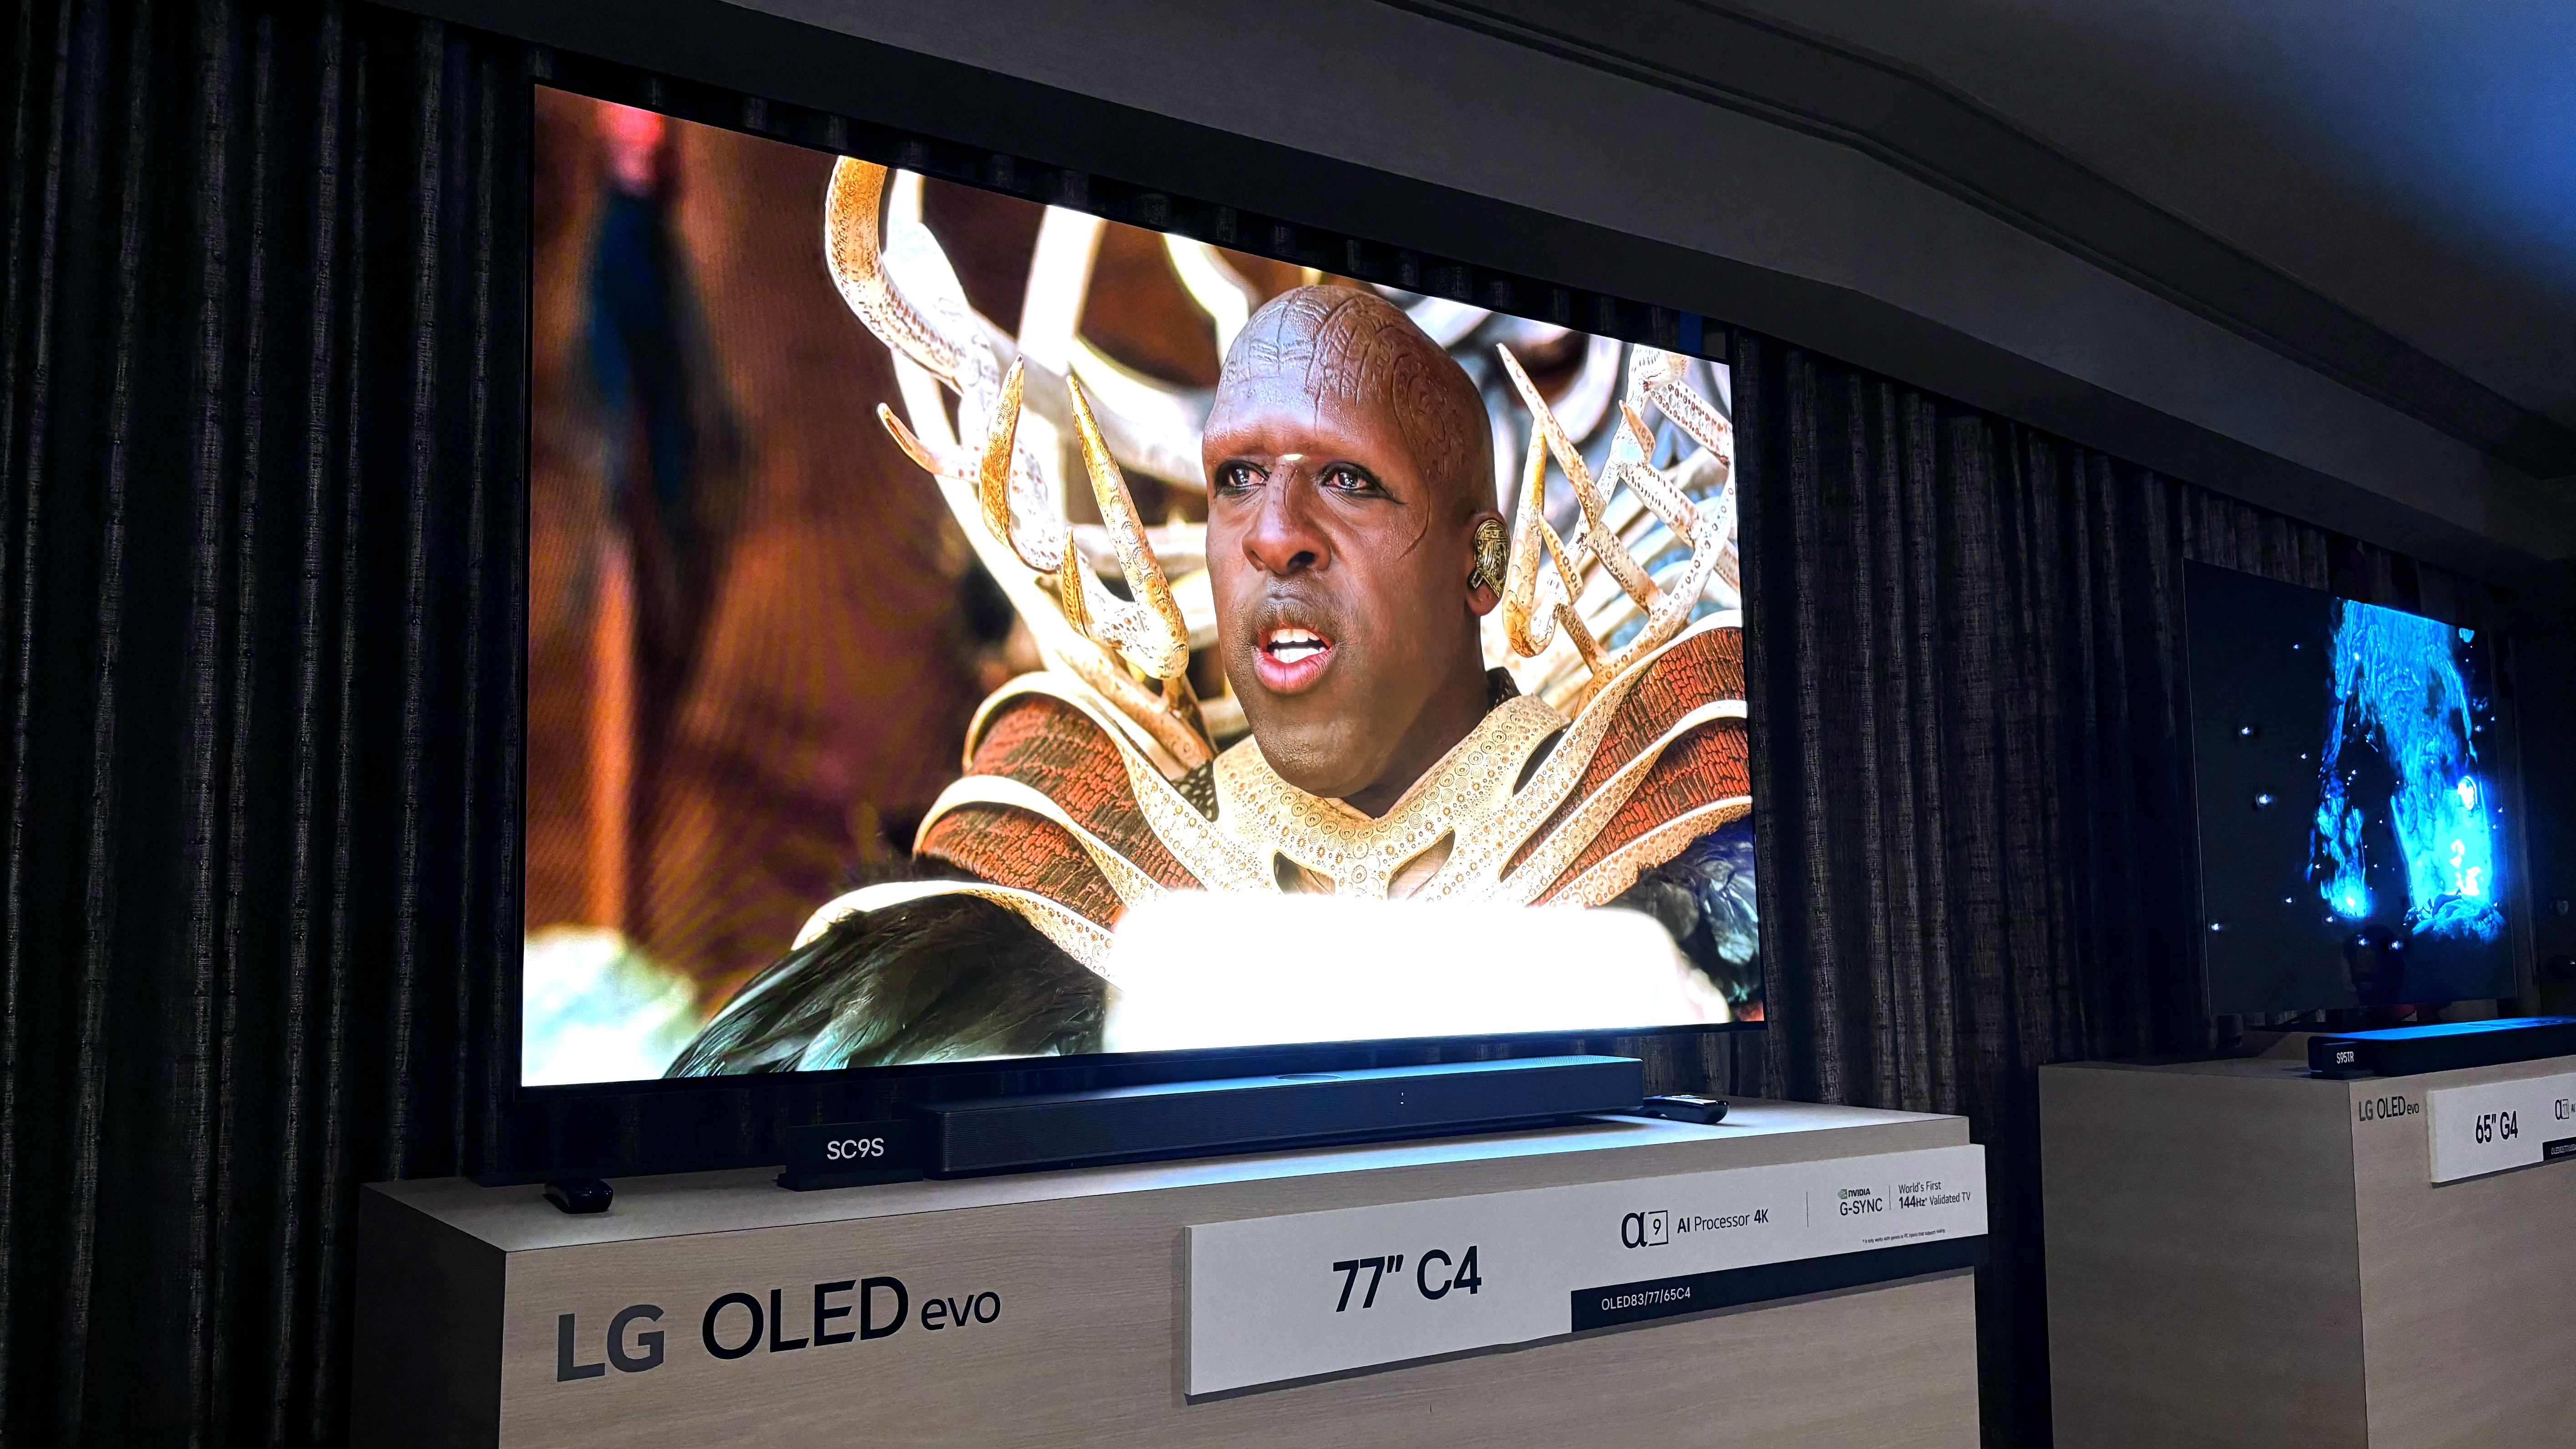 I just tested the 42-inch LG C3 OLED — here's what I like about it